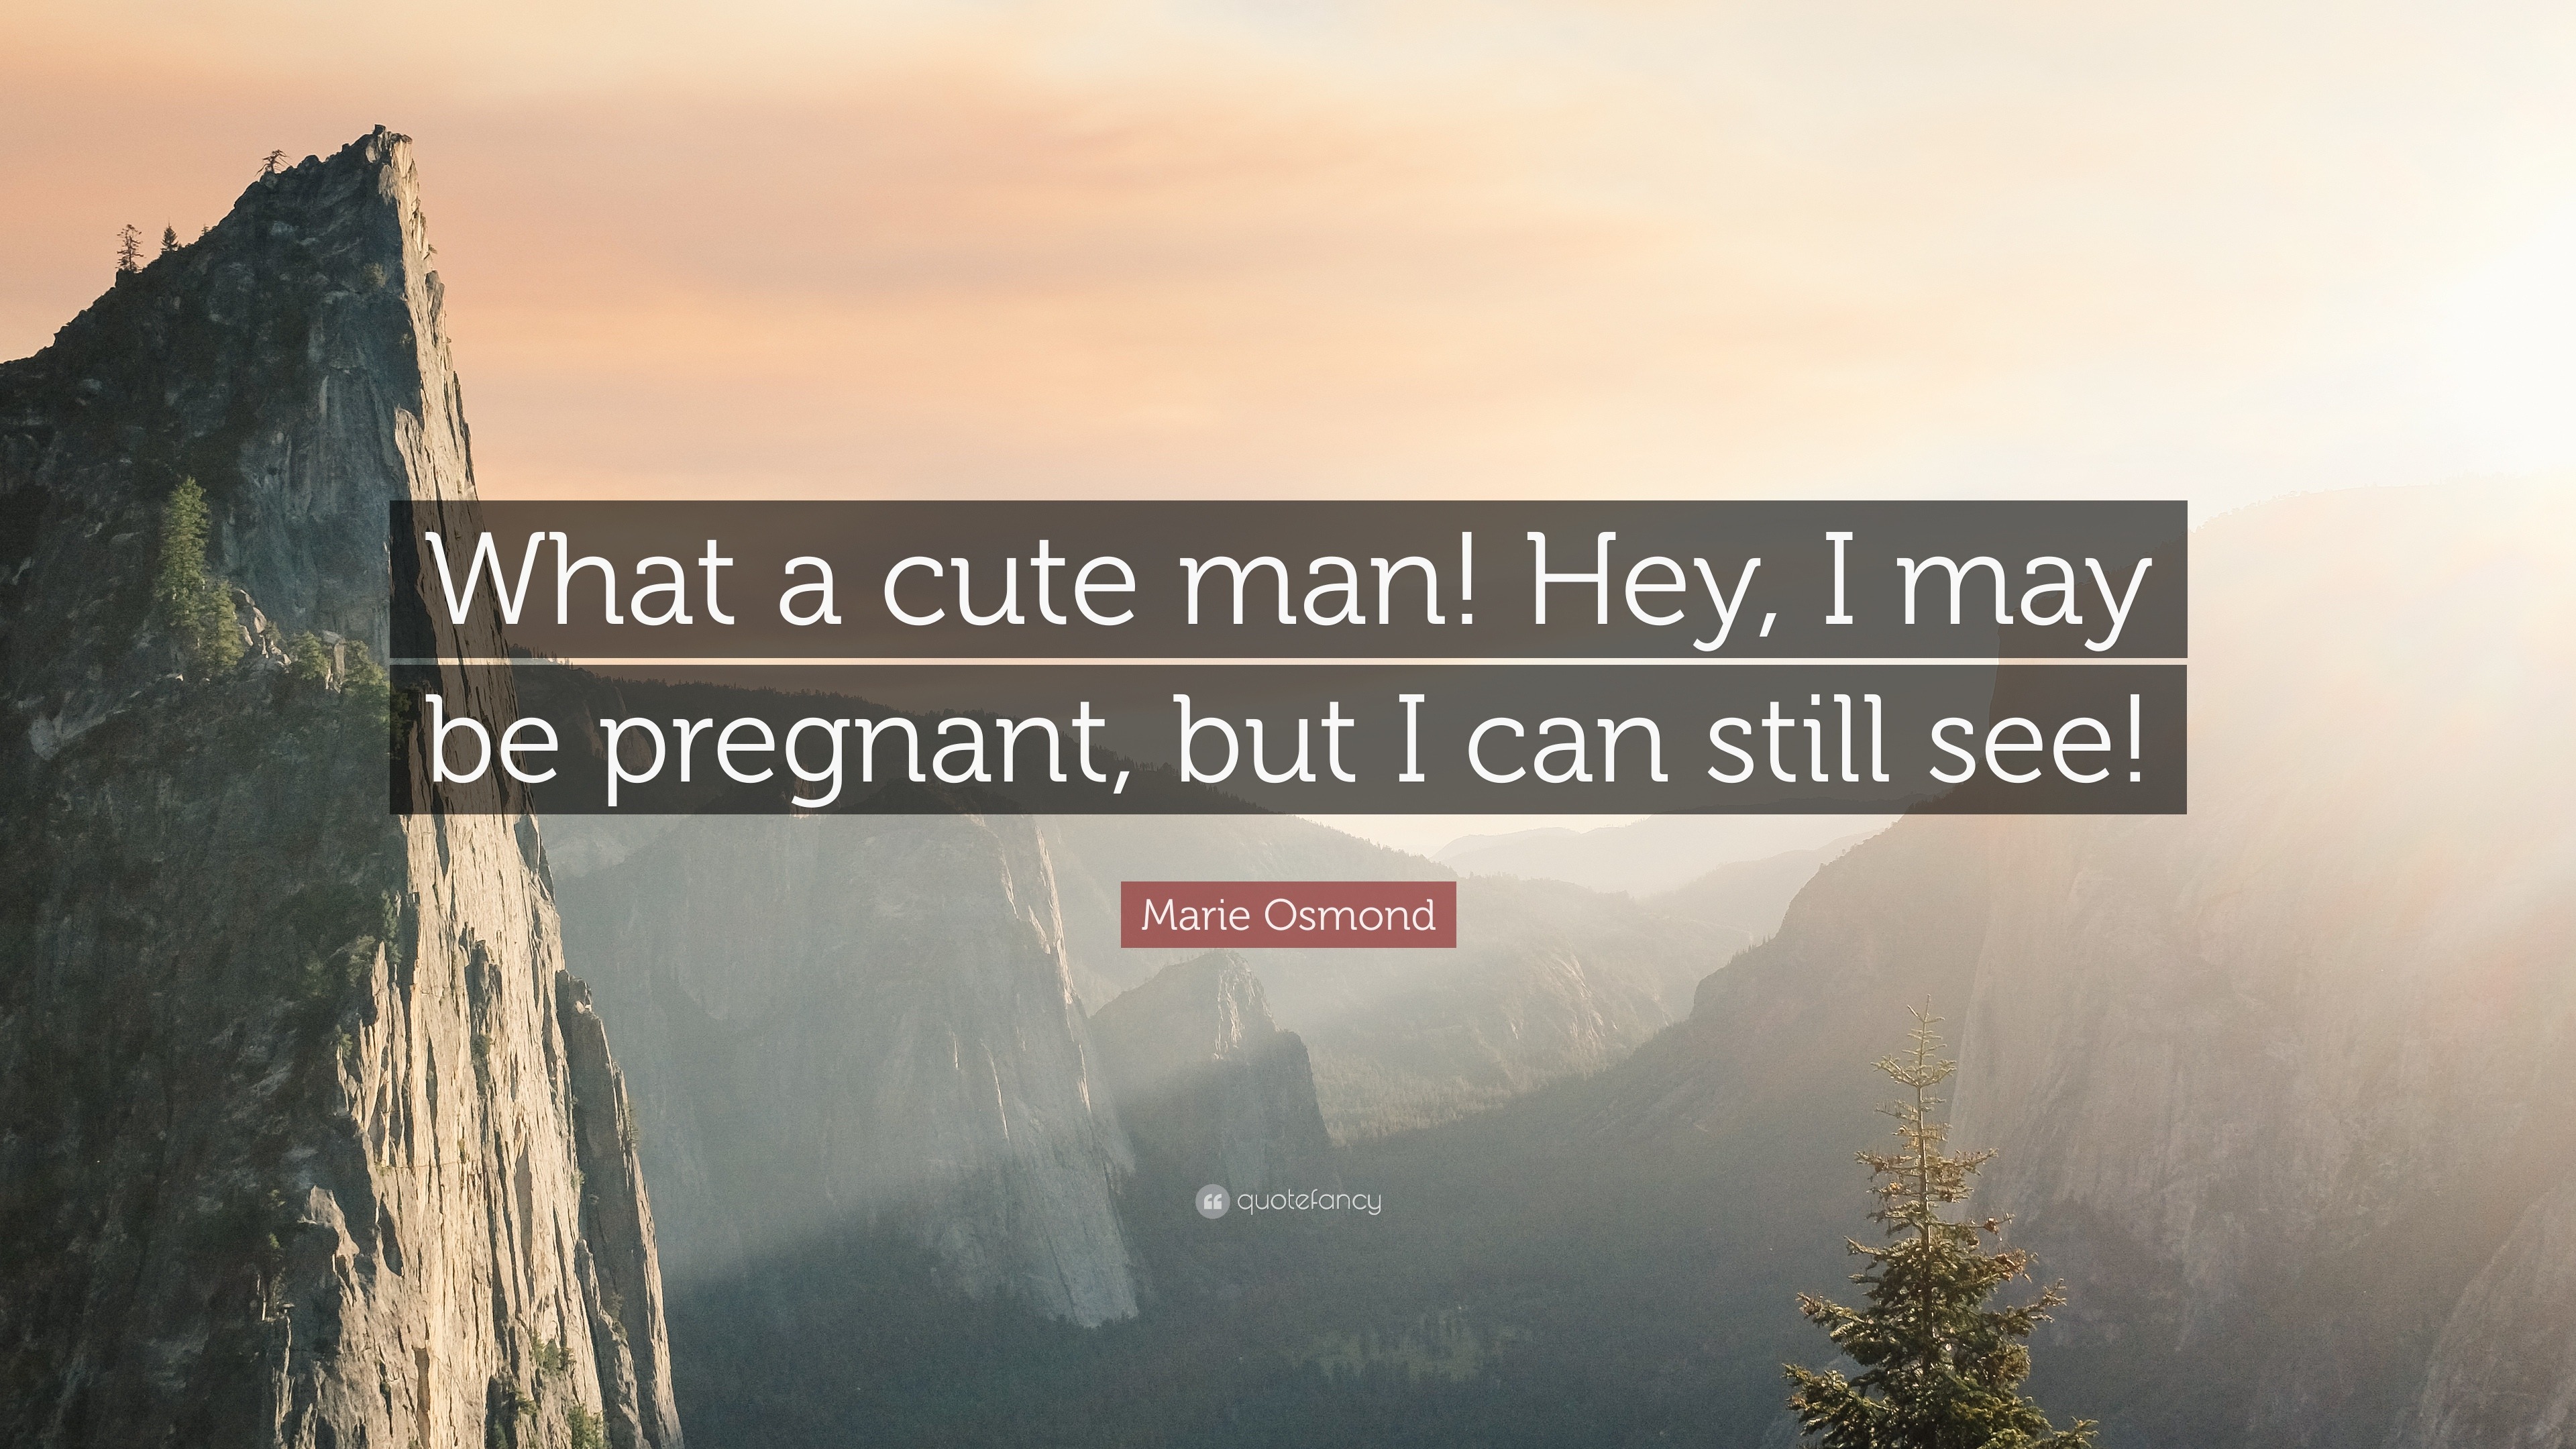 Marie Osmond Quote: “What a cute man! Hey, I may be pregnant, but ...